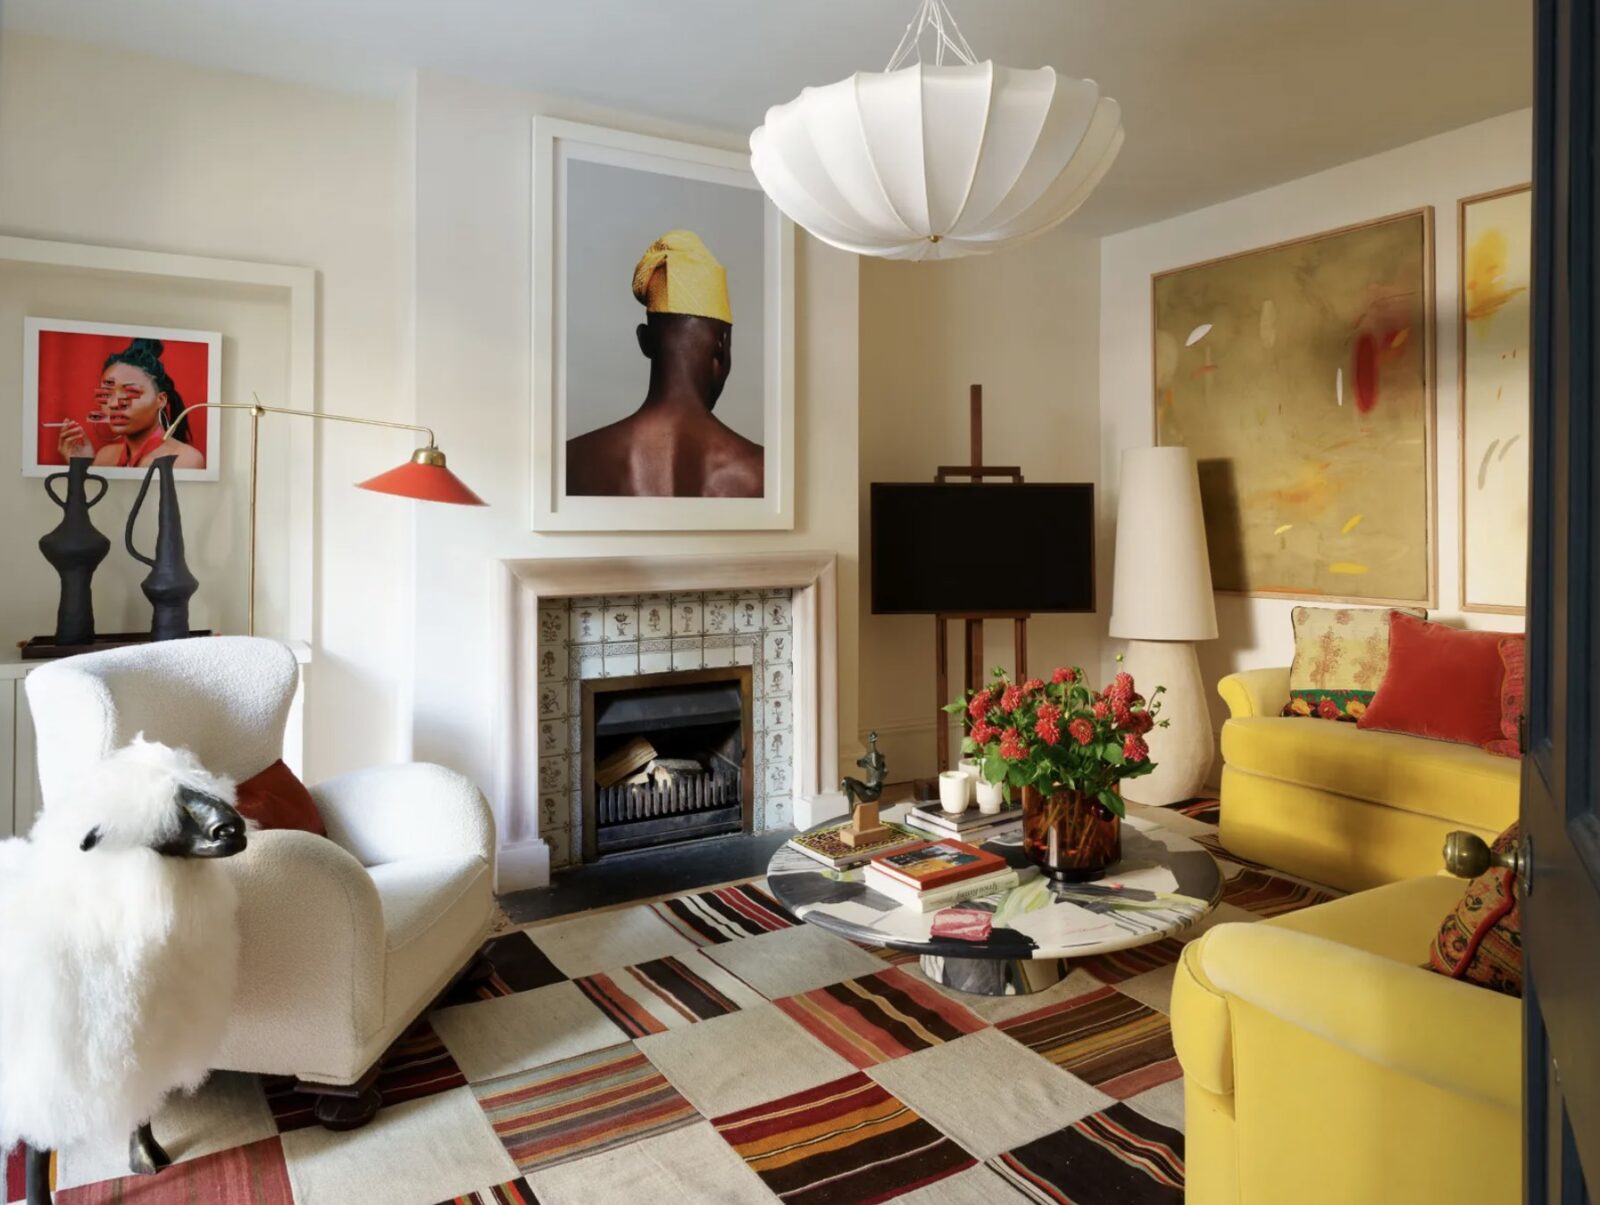 Living room with striped/checkered rug, white armchair, yellow velvet sofa, and large-scale colorful pieces of art